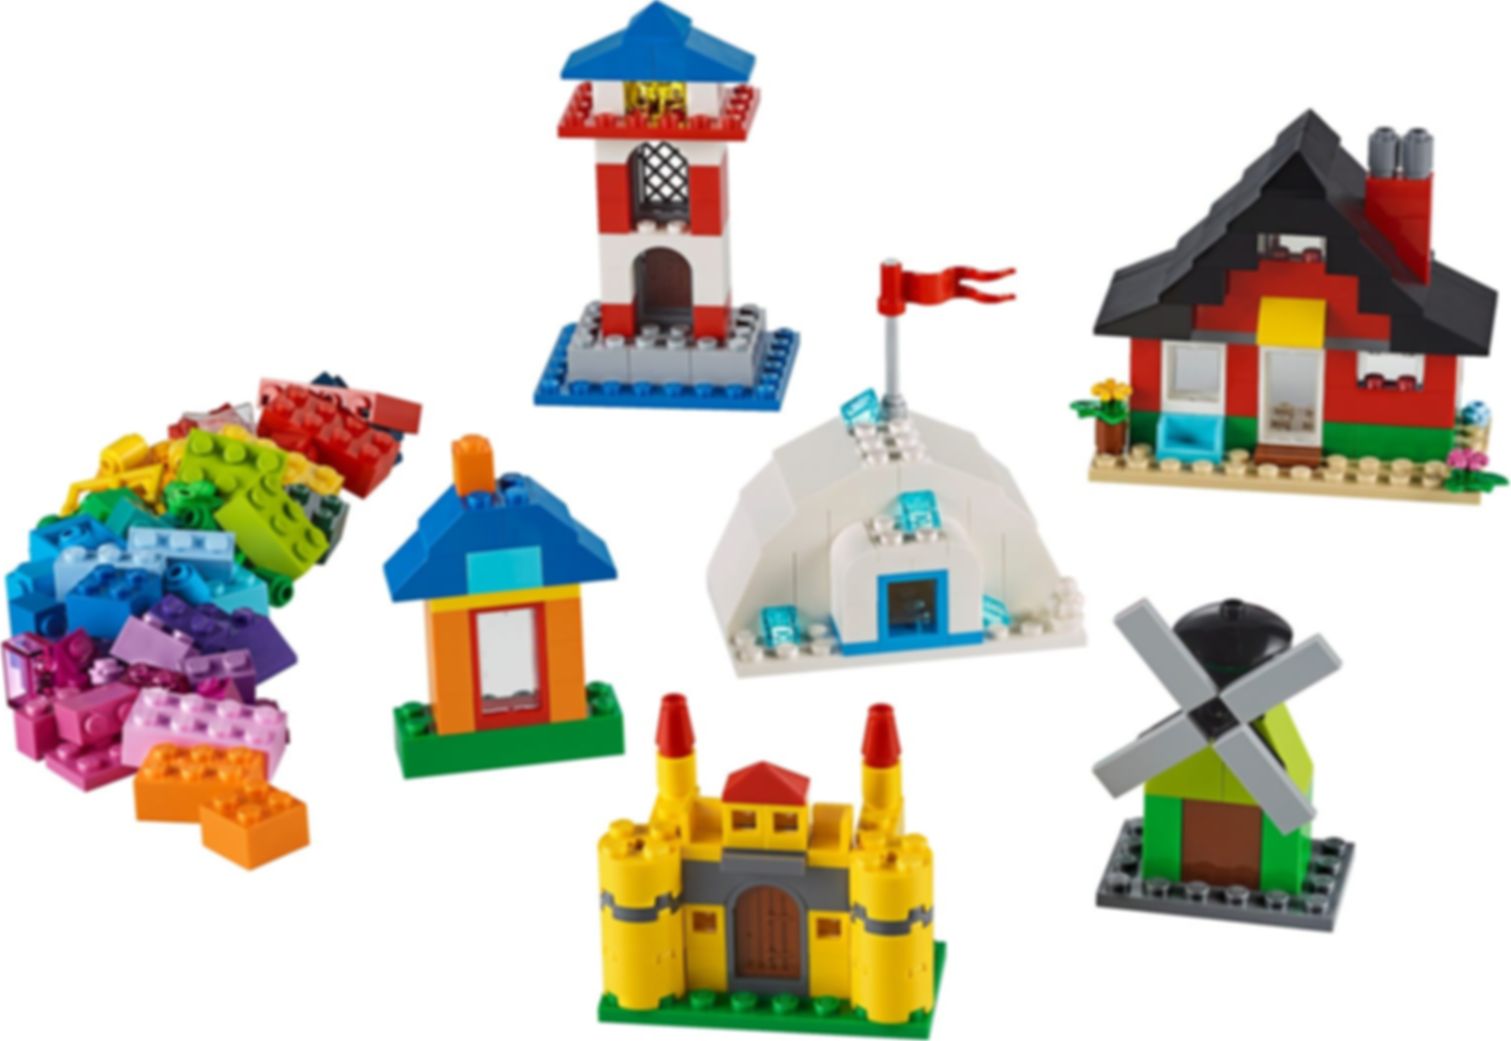 LEGO® Classic Bricks and Houses components